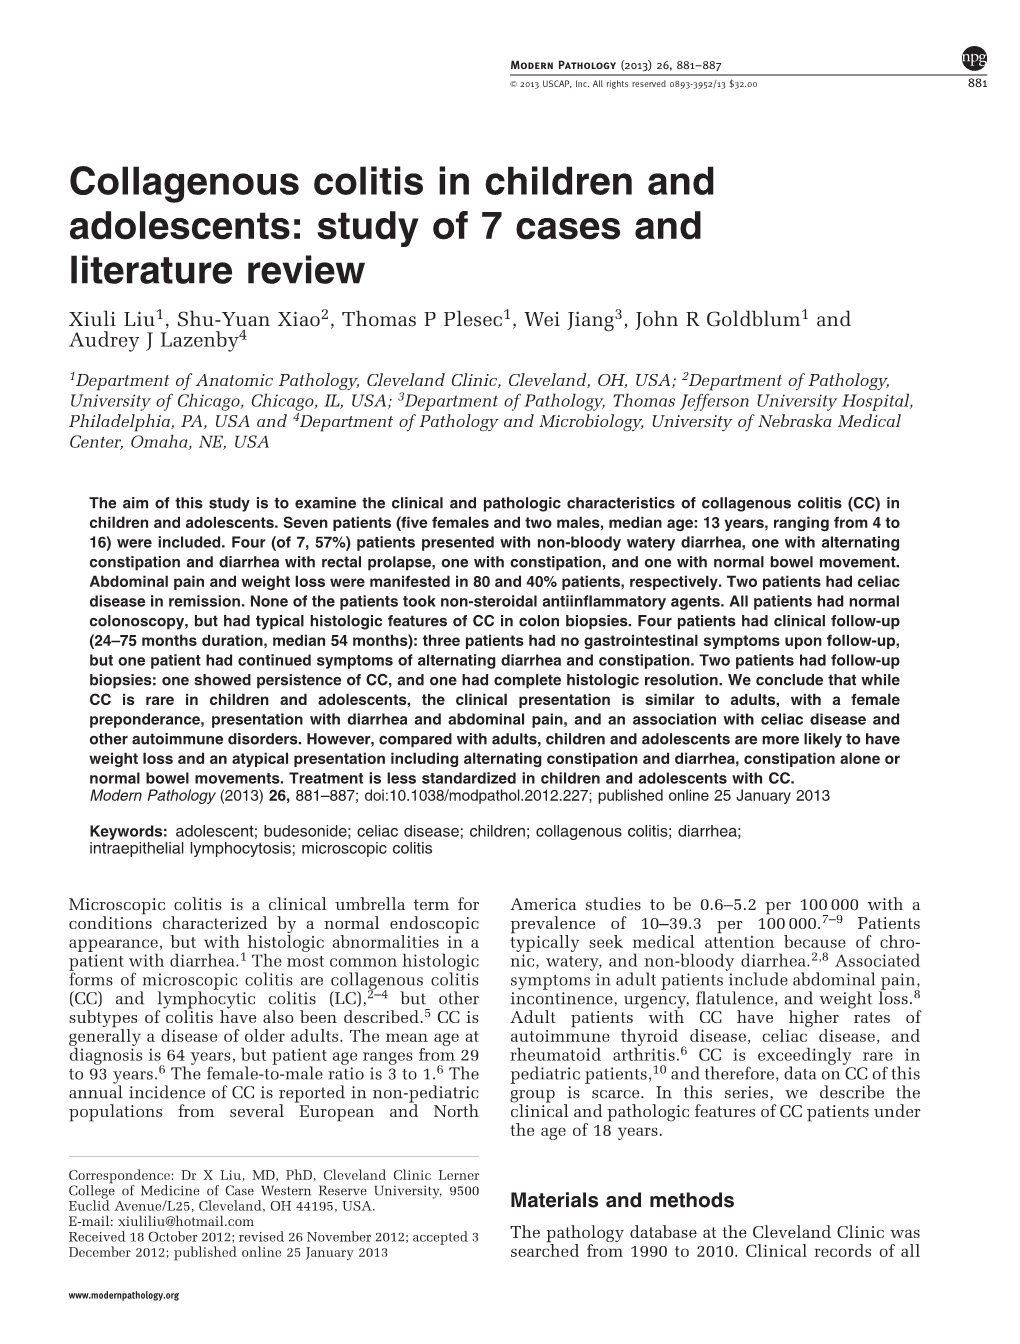 Collagenous Colitis in Children and Adolescents